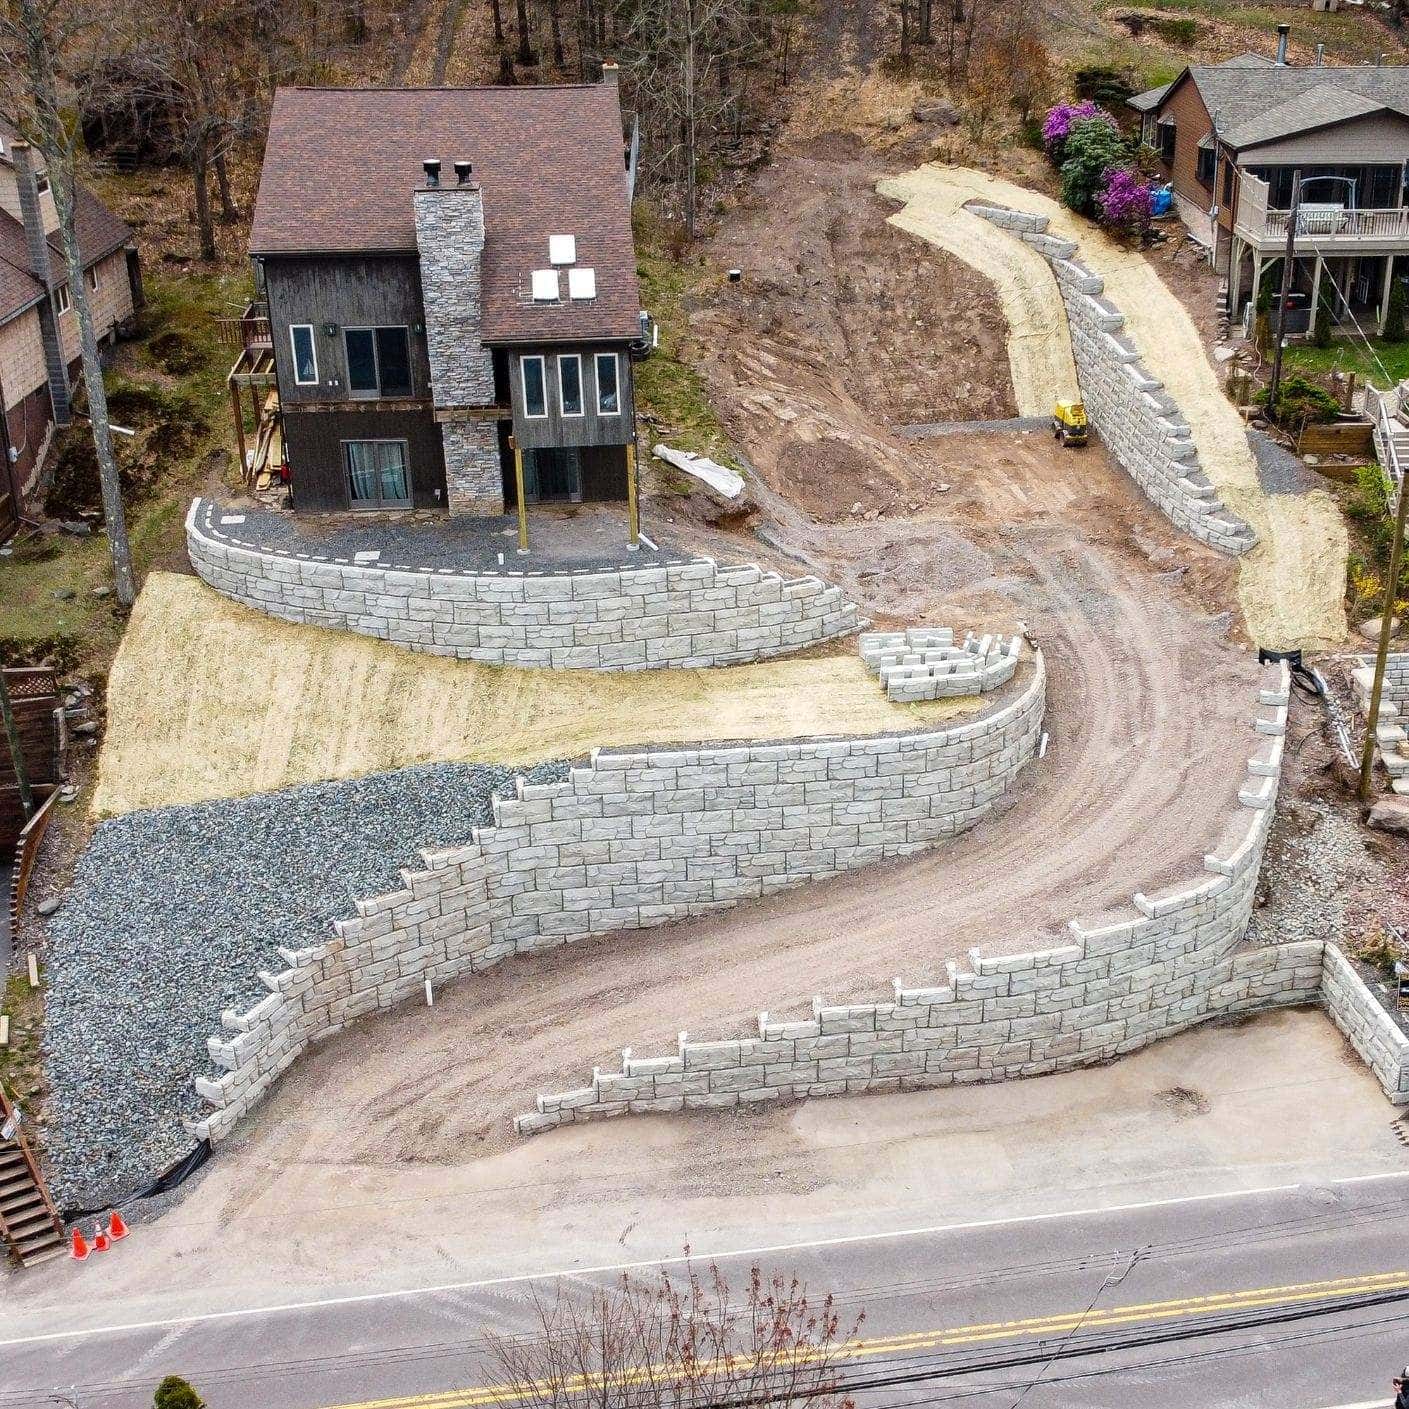 Driveway and parking lot for residential MagnumStone walls